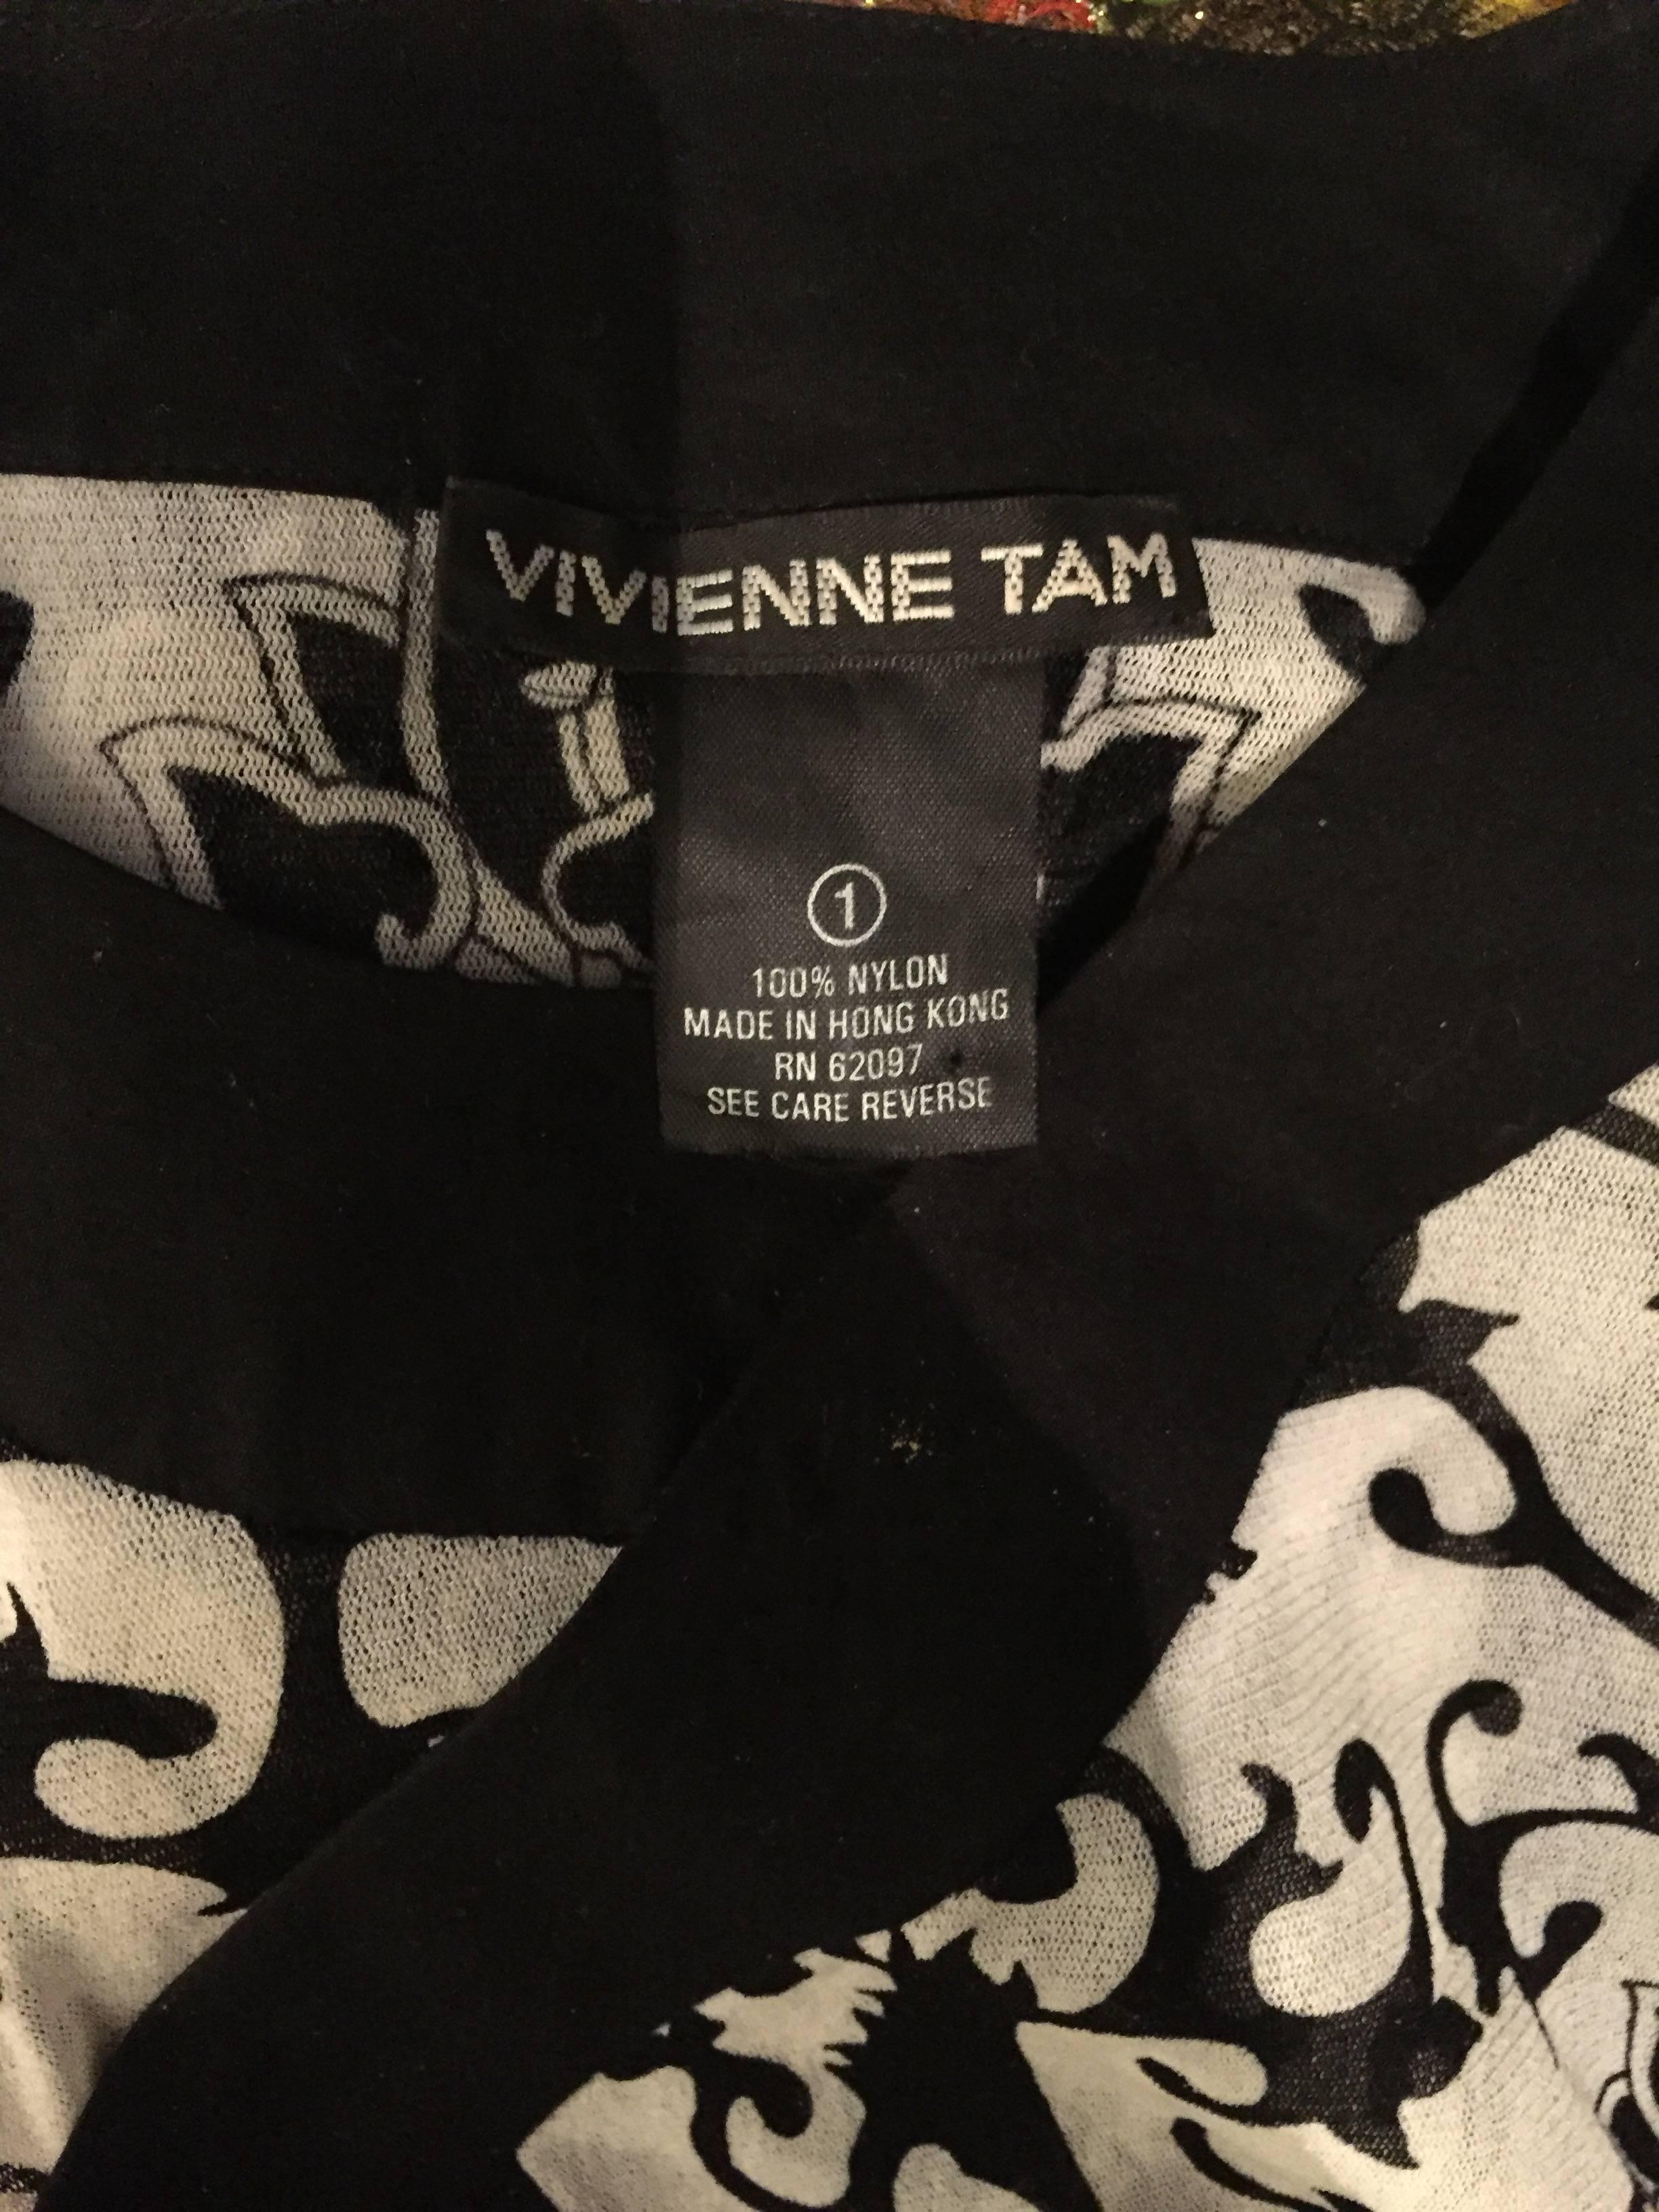 Rare Vintage Vivienne Tam Black and White Tattoo Print Asian Inspired Wrap Dress For Sale 2